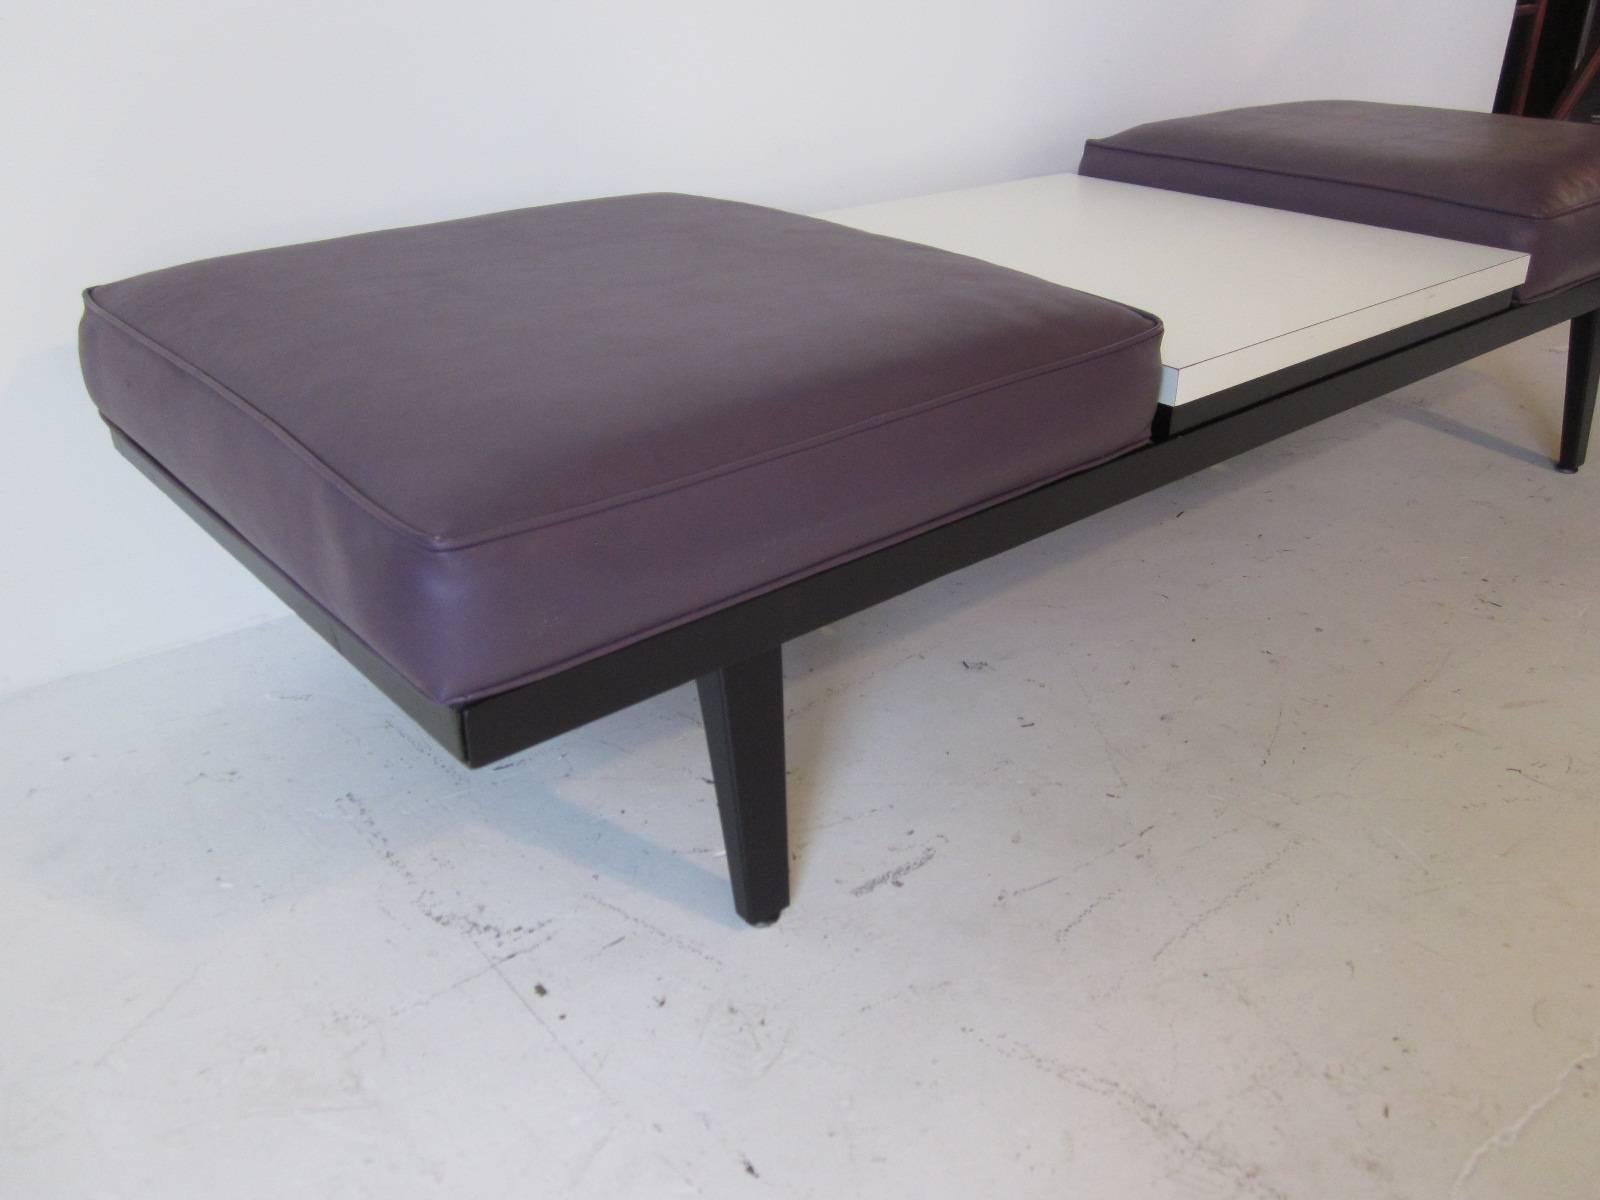 A double cushion Nelson bench with center table in white formica from the steel frame series of furniture by the Herman Miller furniture company. Naugahyde upholstery in a medium purple sitting on a satin black frame complete the bench.